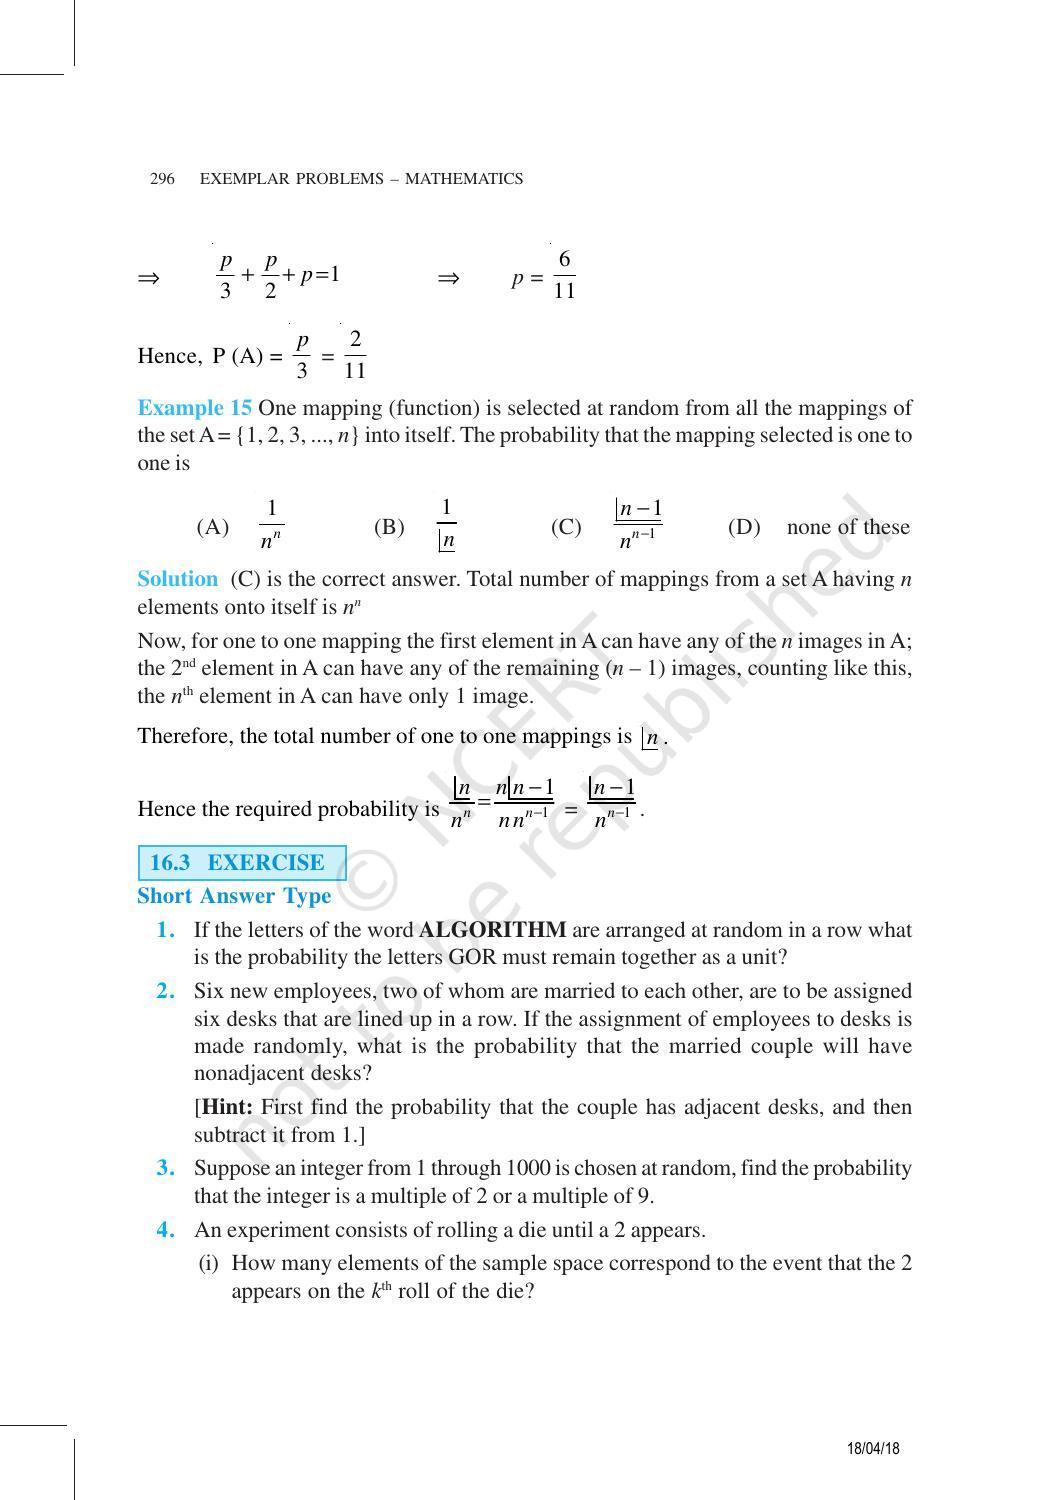 NCERT Exemplar Book for Class 11 Maths: Chapter 16 Probability - Page 13